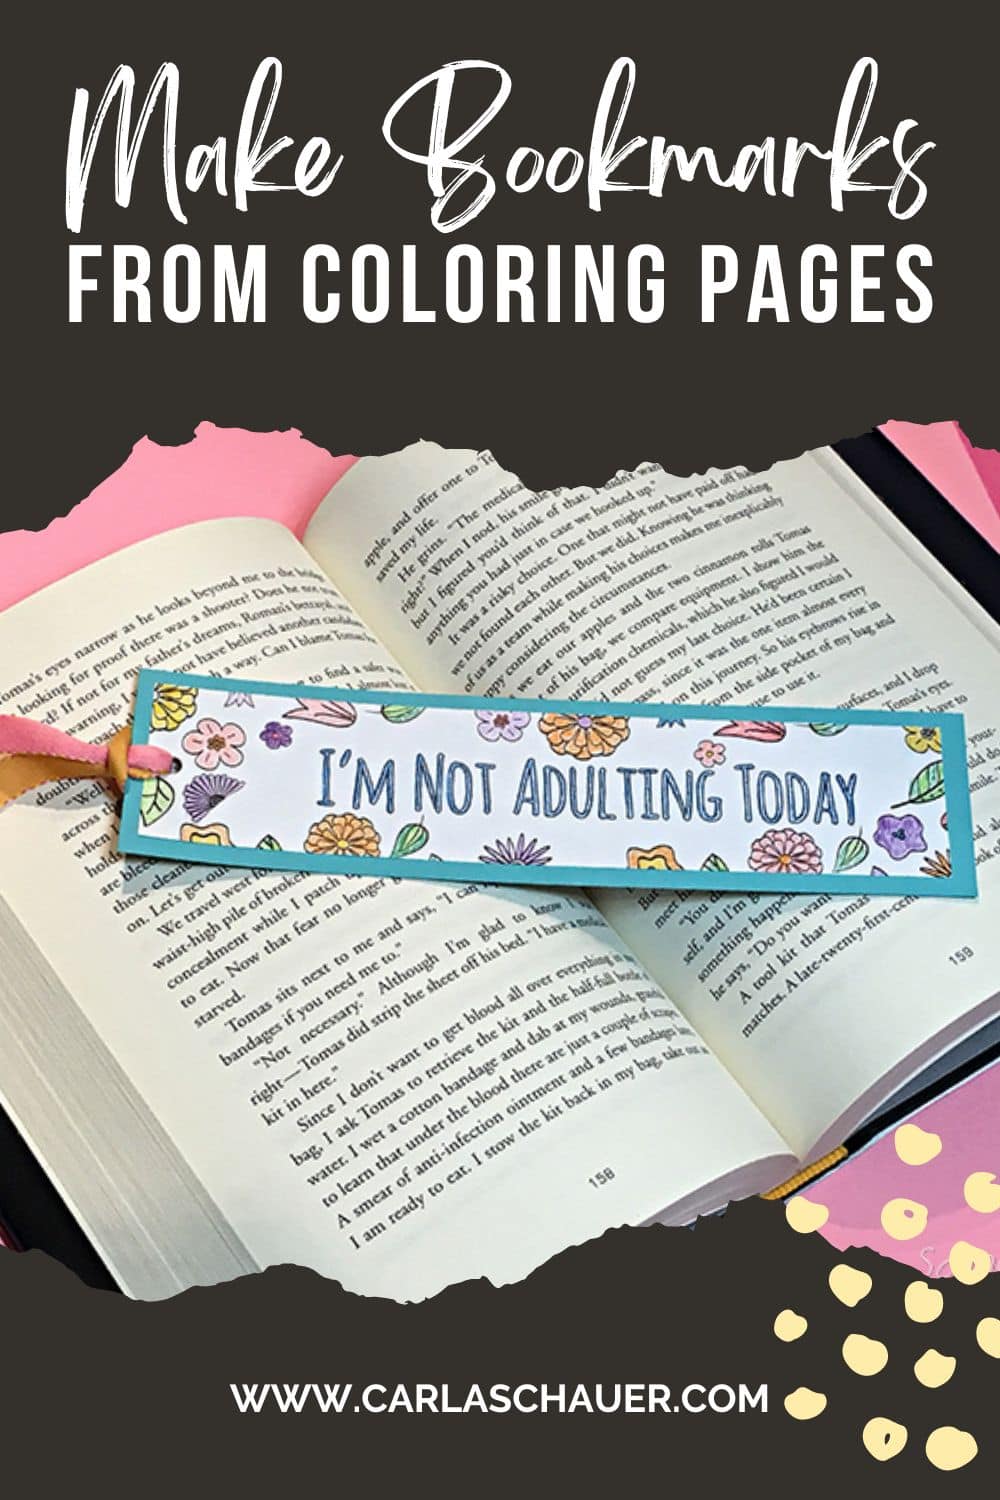 Multicolored floral "I'm not adulting today" bookmark with teal border lying sideways on an open book. White text on a charcoal stripe reads "Make Bookmarks from coloring pages"